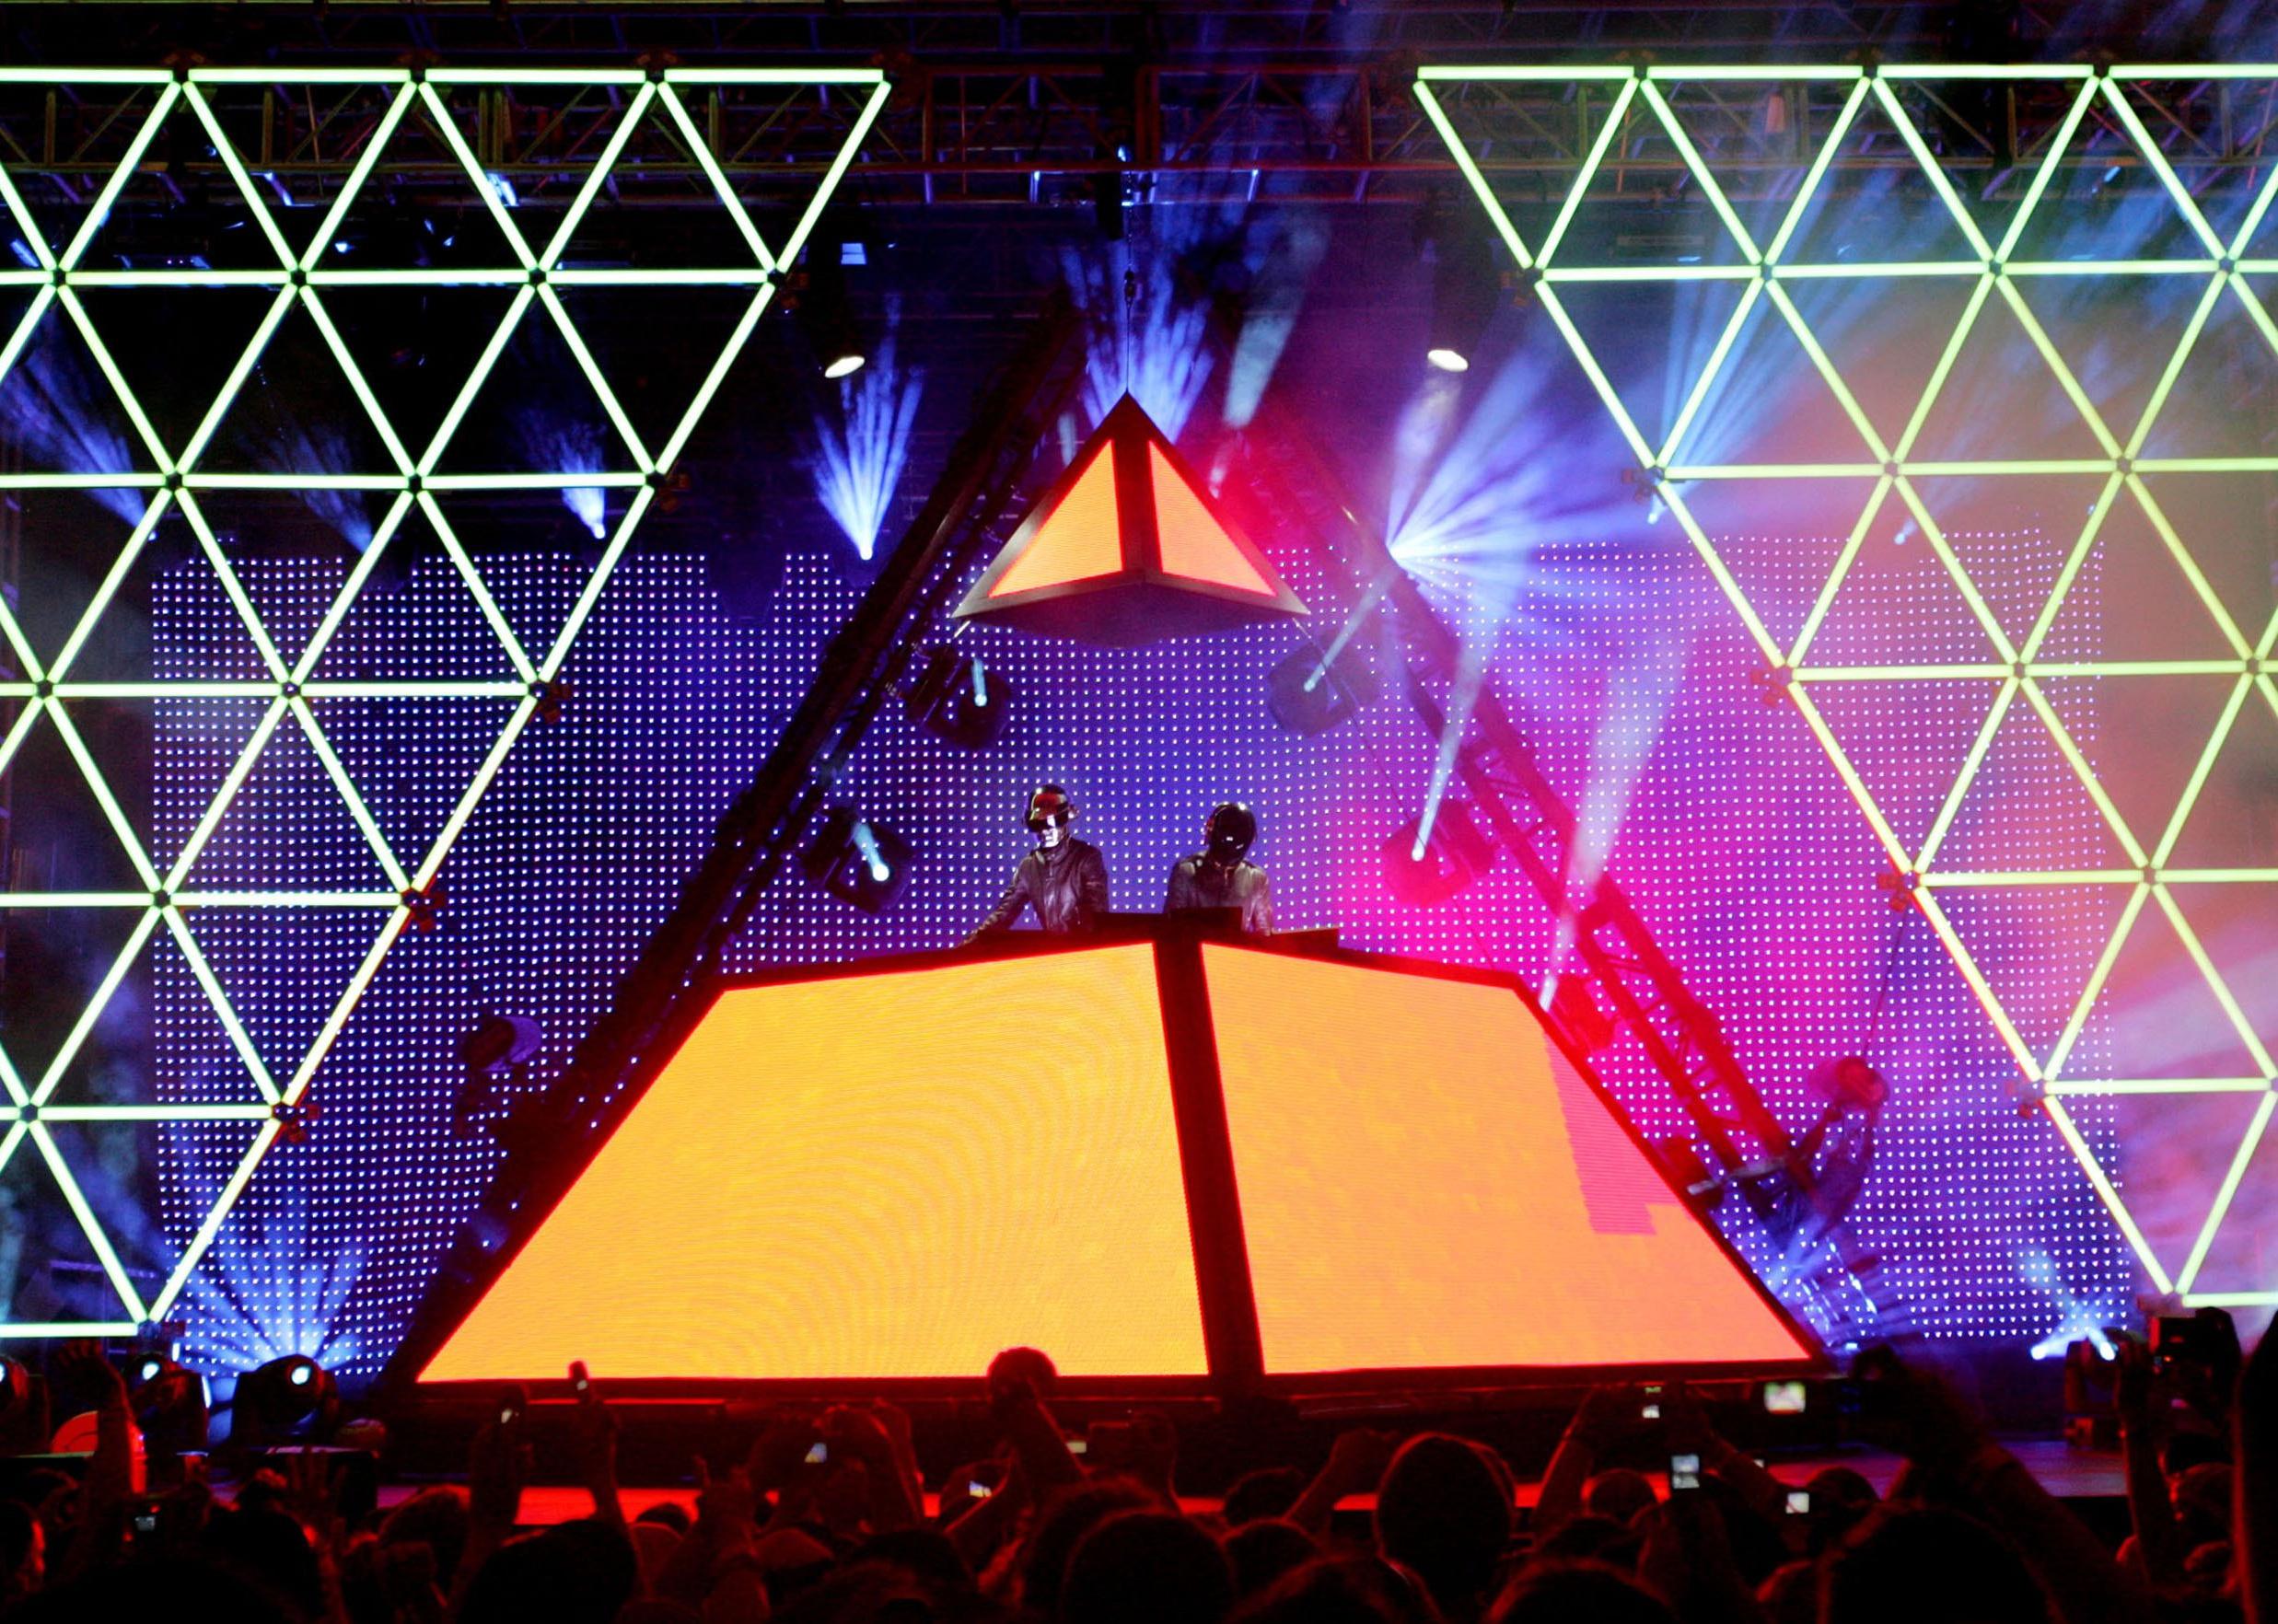 Daft Punk performs at the Coachella Music Fesival.